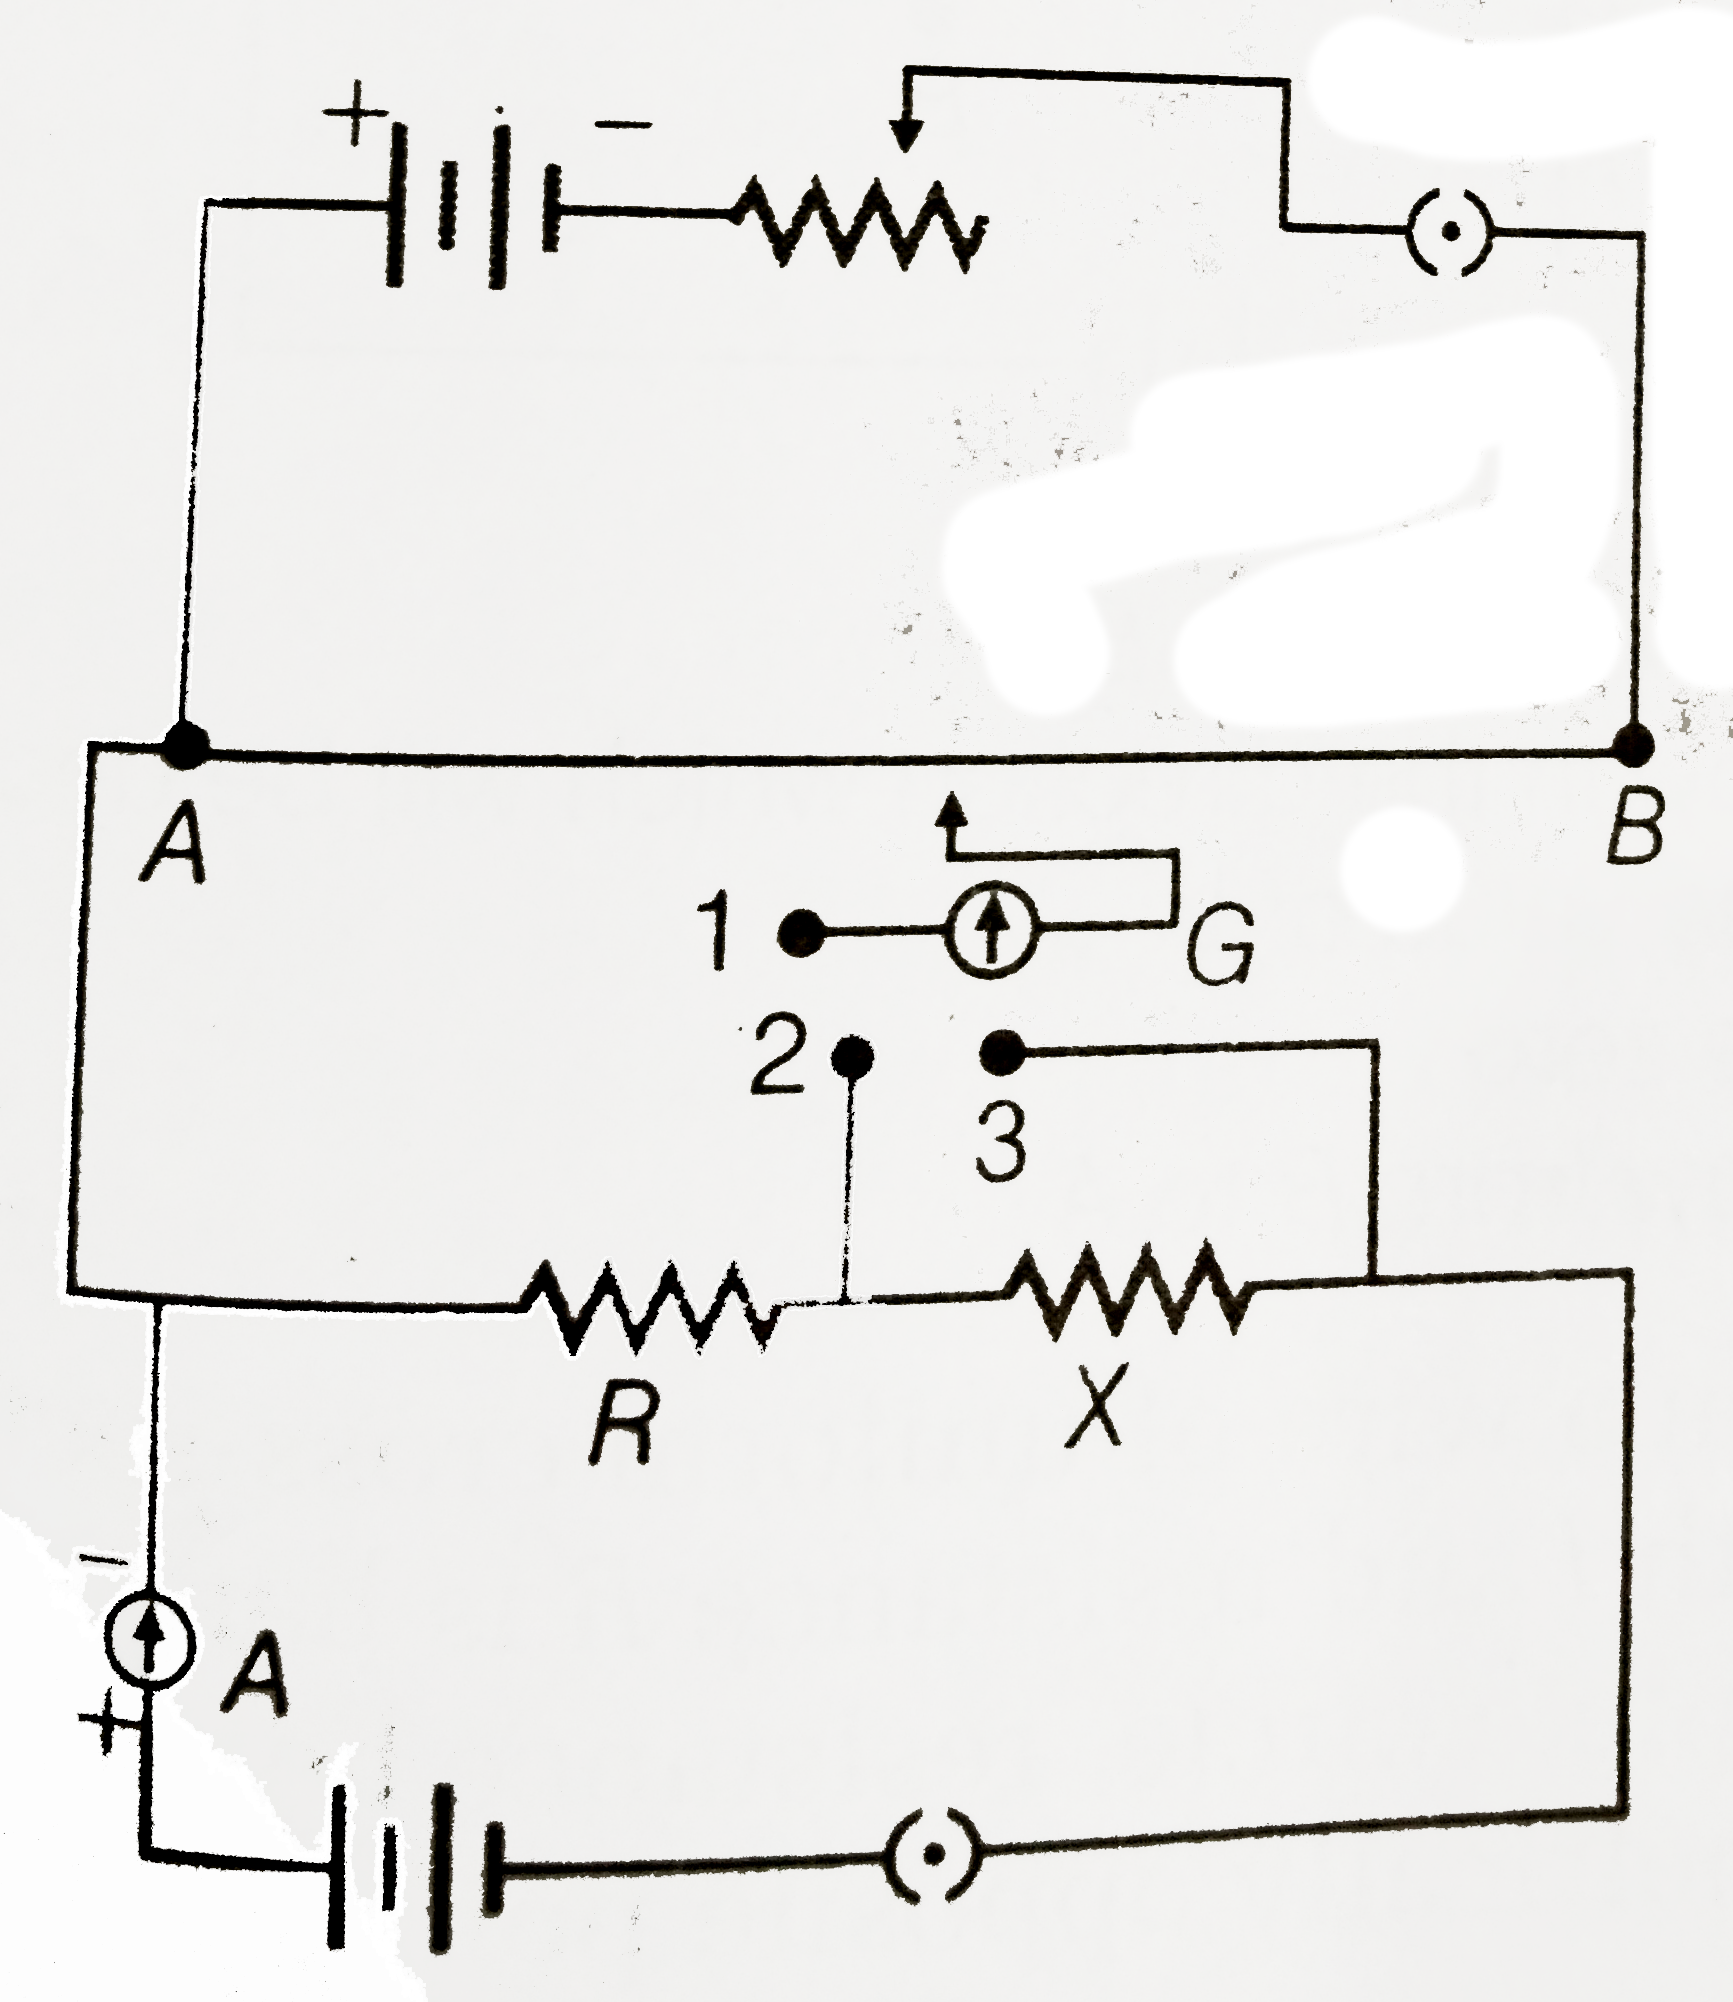 A potentiometer circuit is set up as shown. The potential gradient across the potentiometer wire, is k volt/cm and the ammeter, present in the circuit, reads 1.0A when two way key is switched off. The balance points , when the key between the terminals (a) 1 and 2 (b) 1 and 3 , is plugged in, are found to be at length l(1)cm